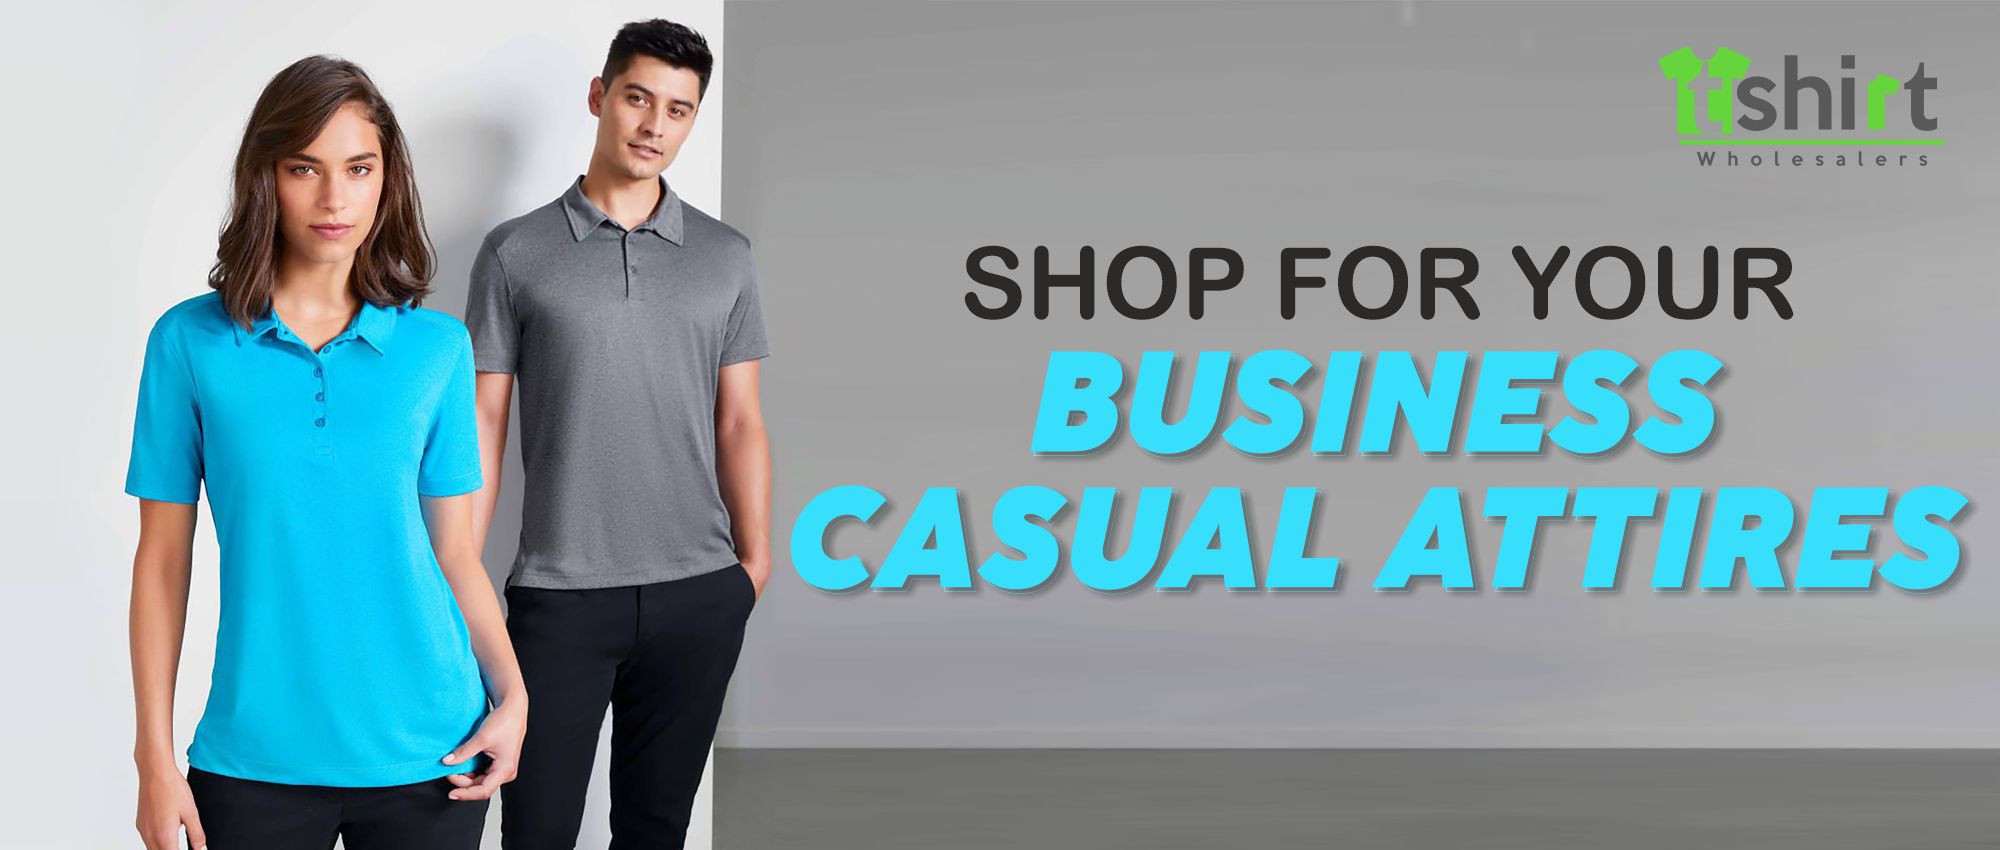 SHOP FOR YOUR BUSINESS CASUAL ATTIRES